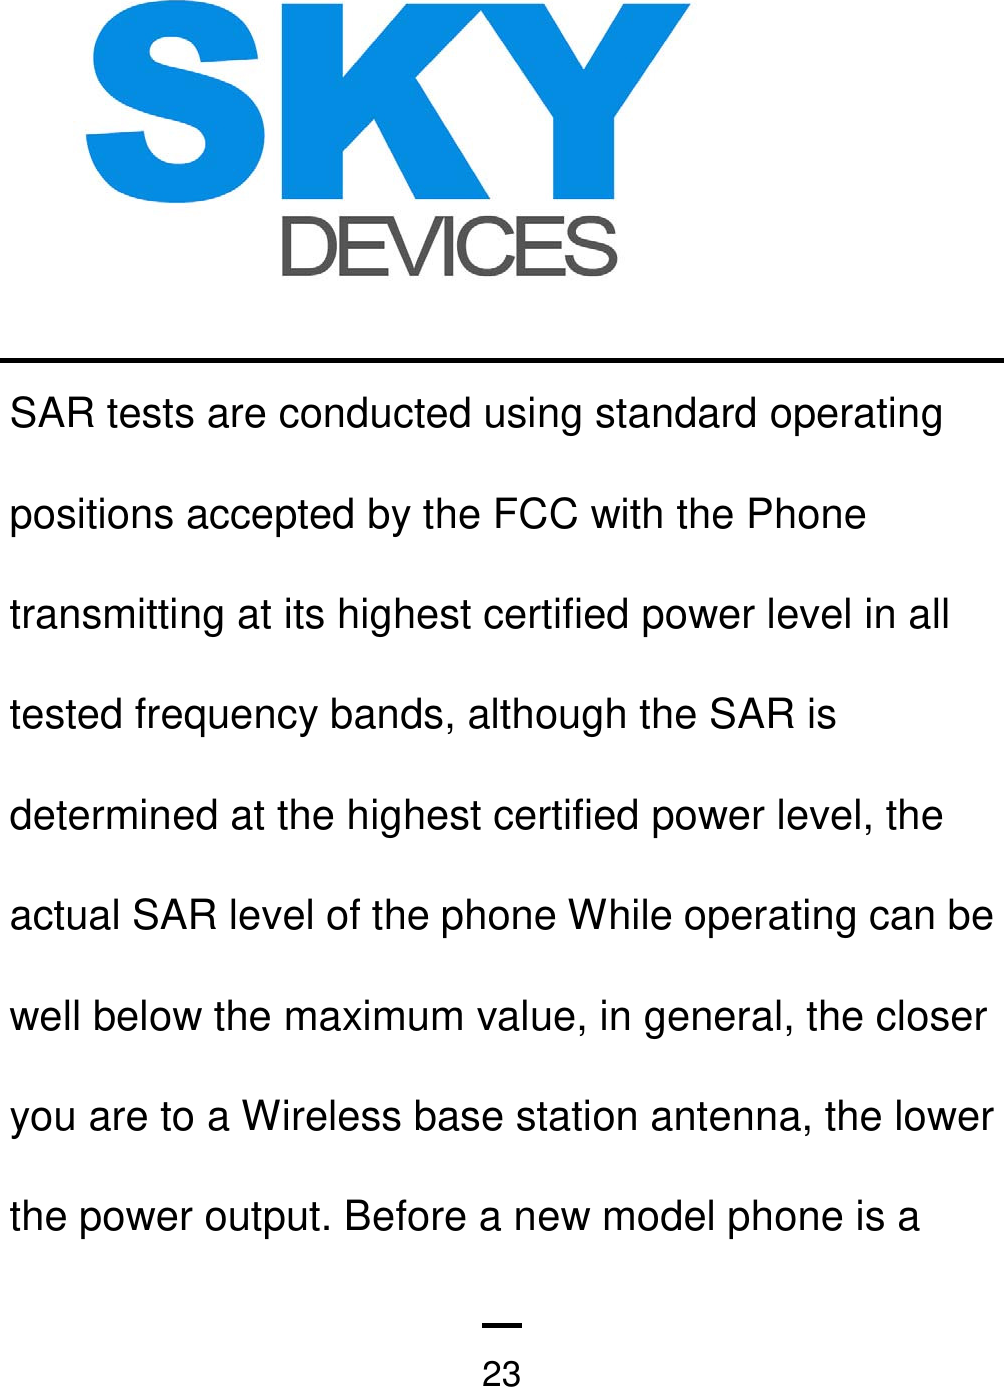   23SAR tests are conducted using standard operating positions accepted by the FCC with the Phone transmitting at its highest certified power level in all tested frequency bands, although the SAR is determined at the highest certified power level, the actual SAR level of the phone While operating can be well below the maximum value, in general, the closer you are to a Wireless base station antenna, the lower the power output. Before a new model phone is a 